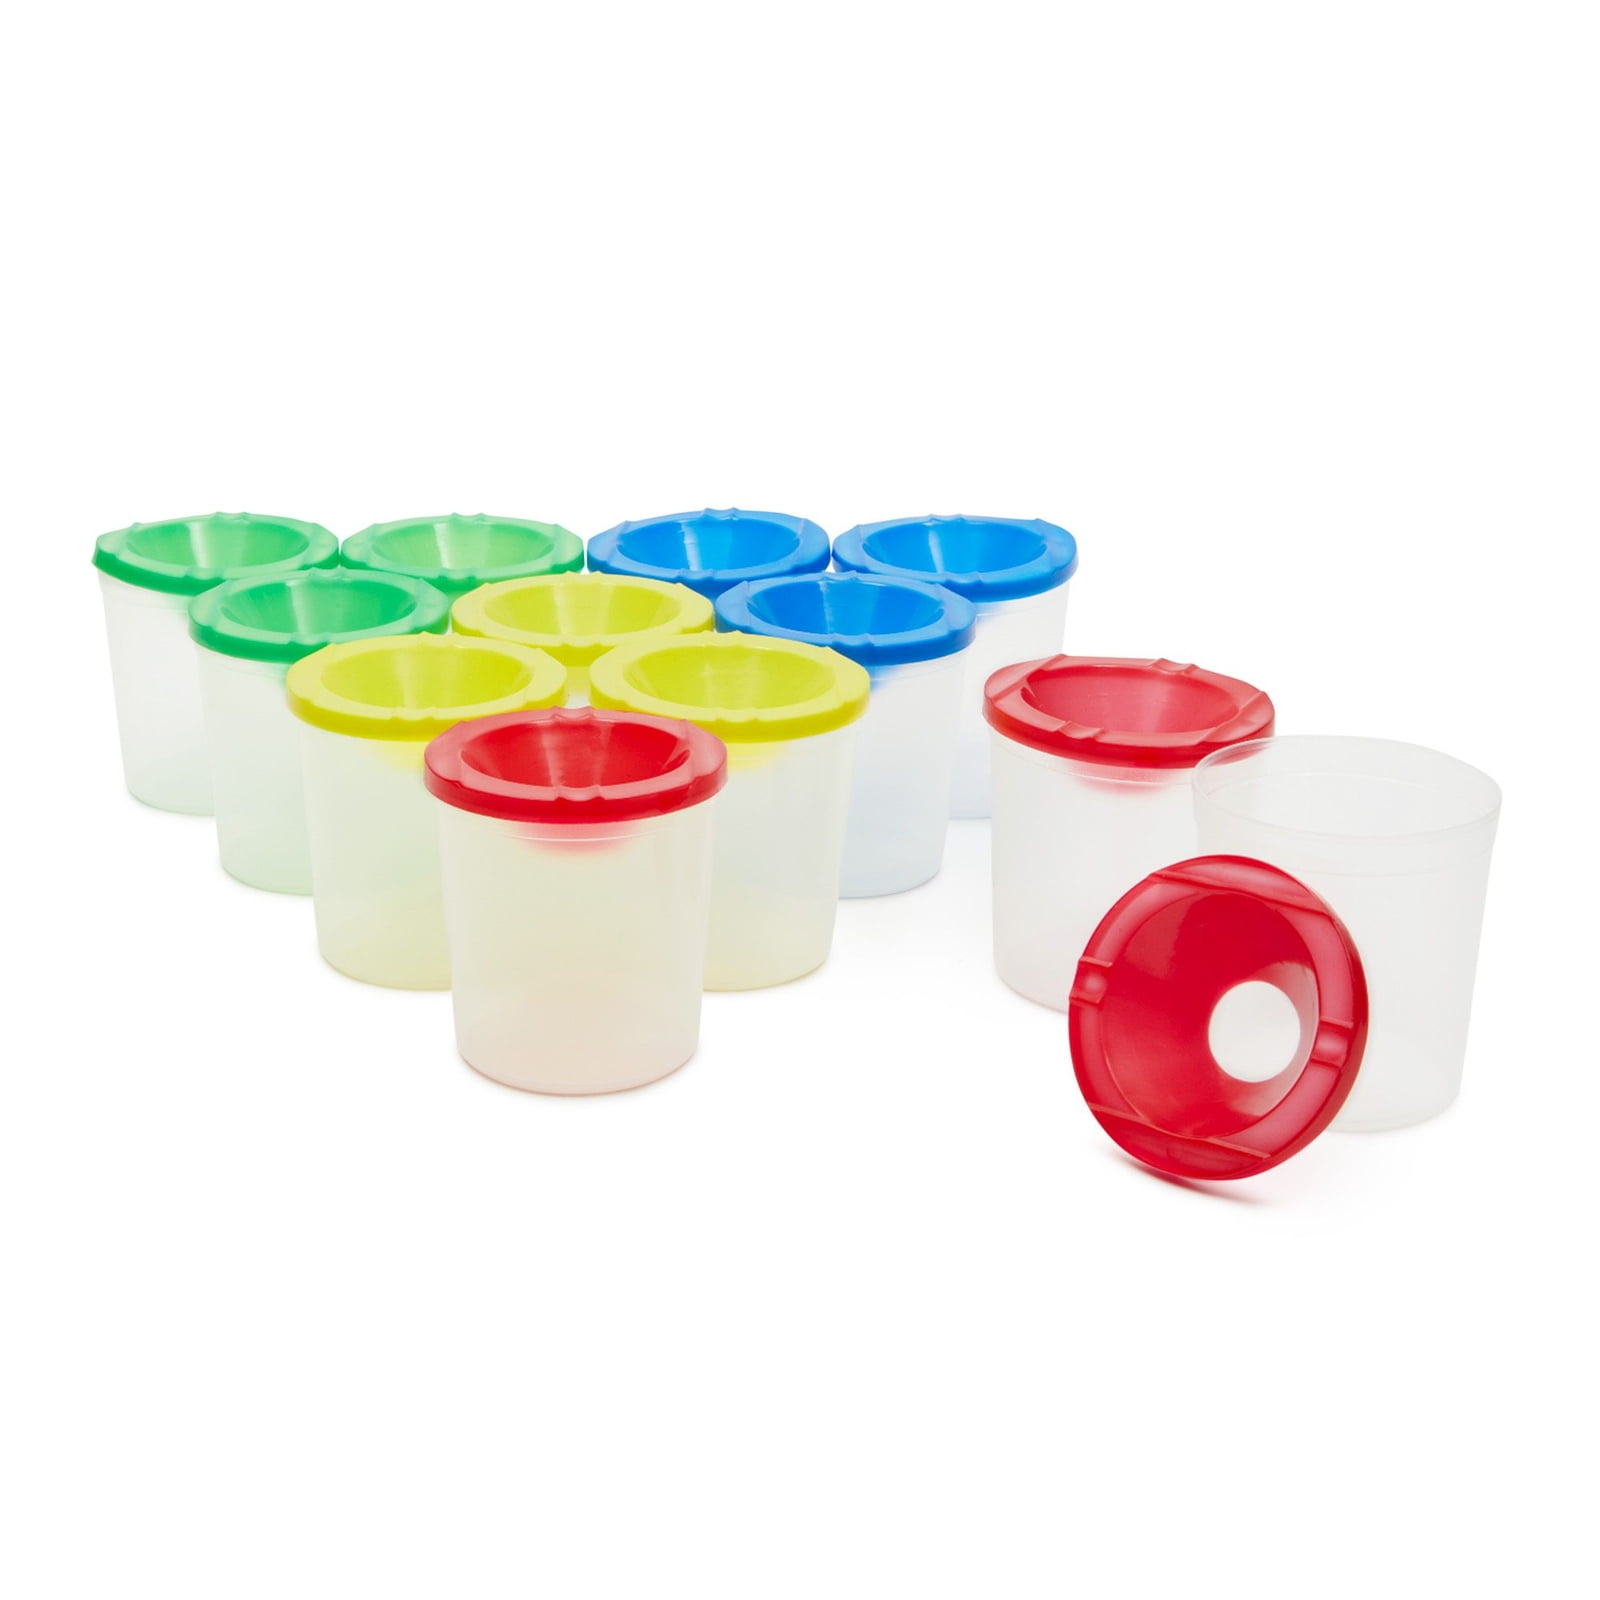 AKORD Pieces Spill Proof Paint Cups in 4 Colors and 10 Pieces Assorted Colored Brushes Set